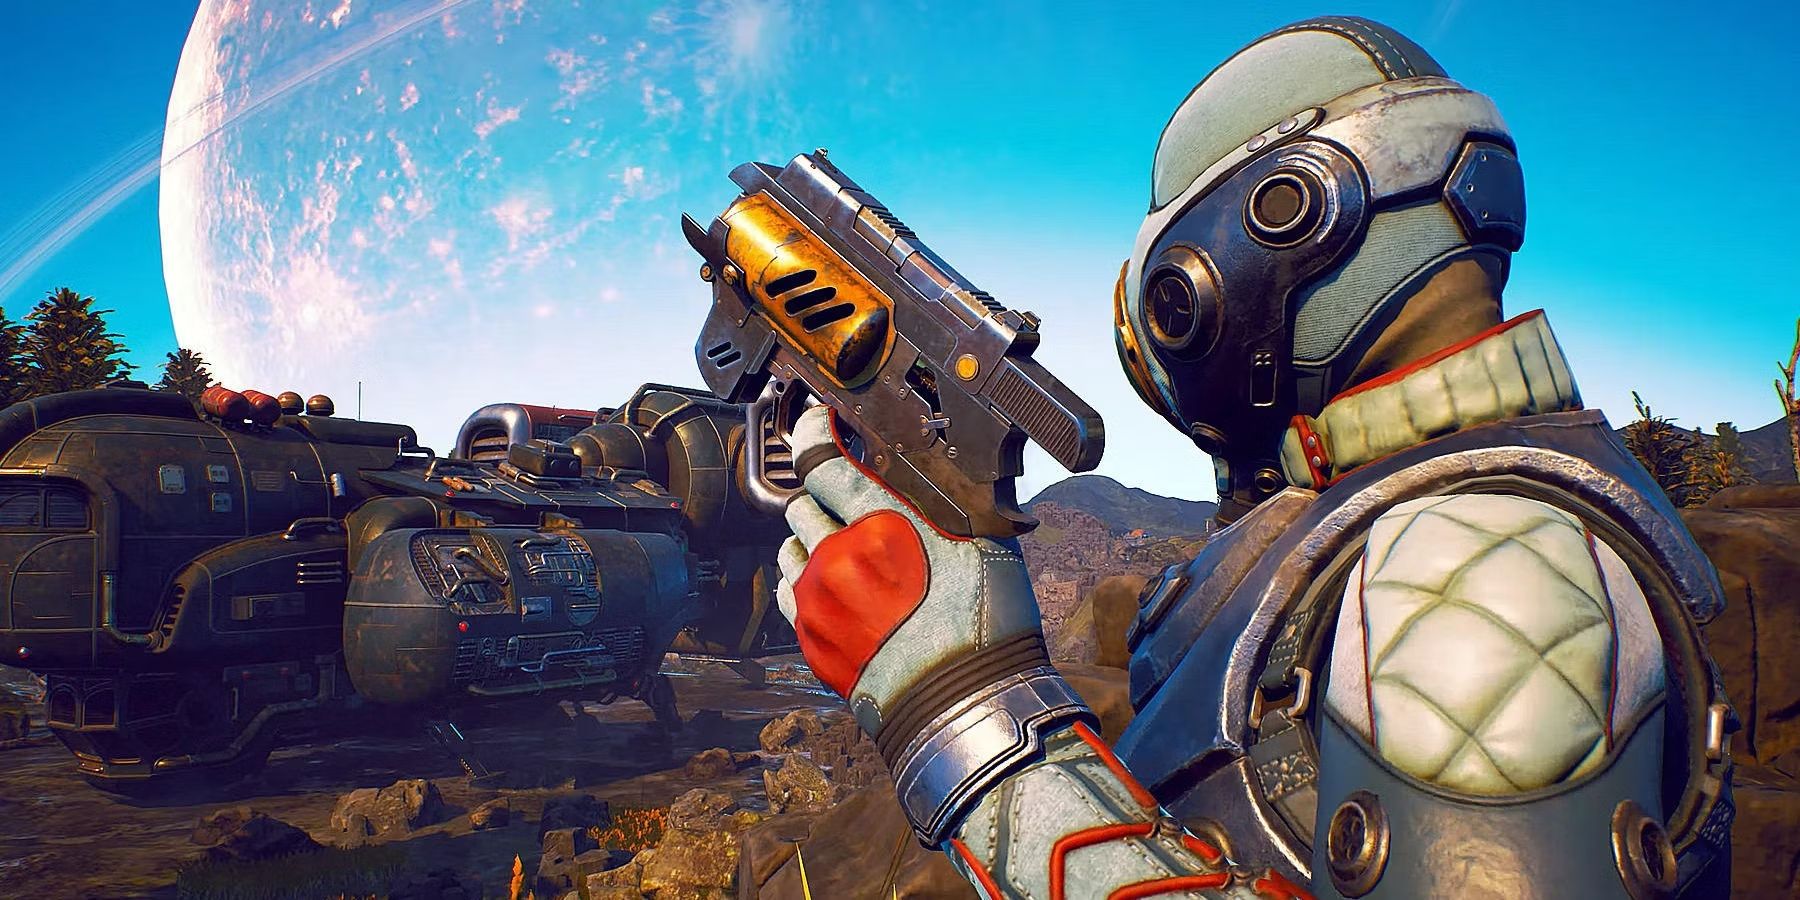 Buy The Outer Worlds: Spacer's Choice Edition